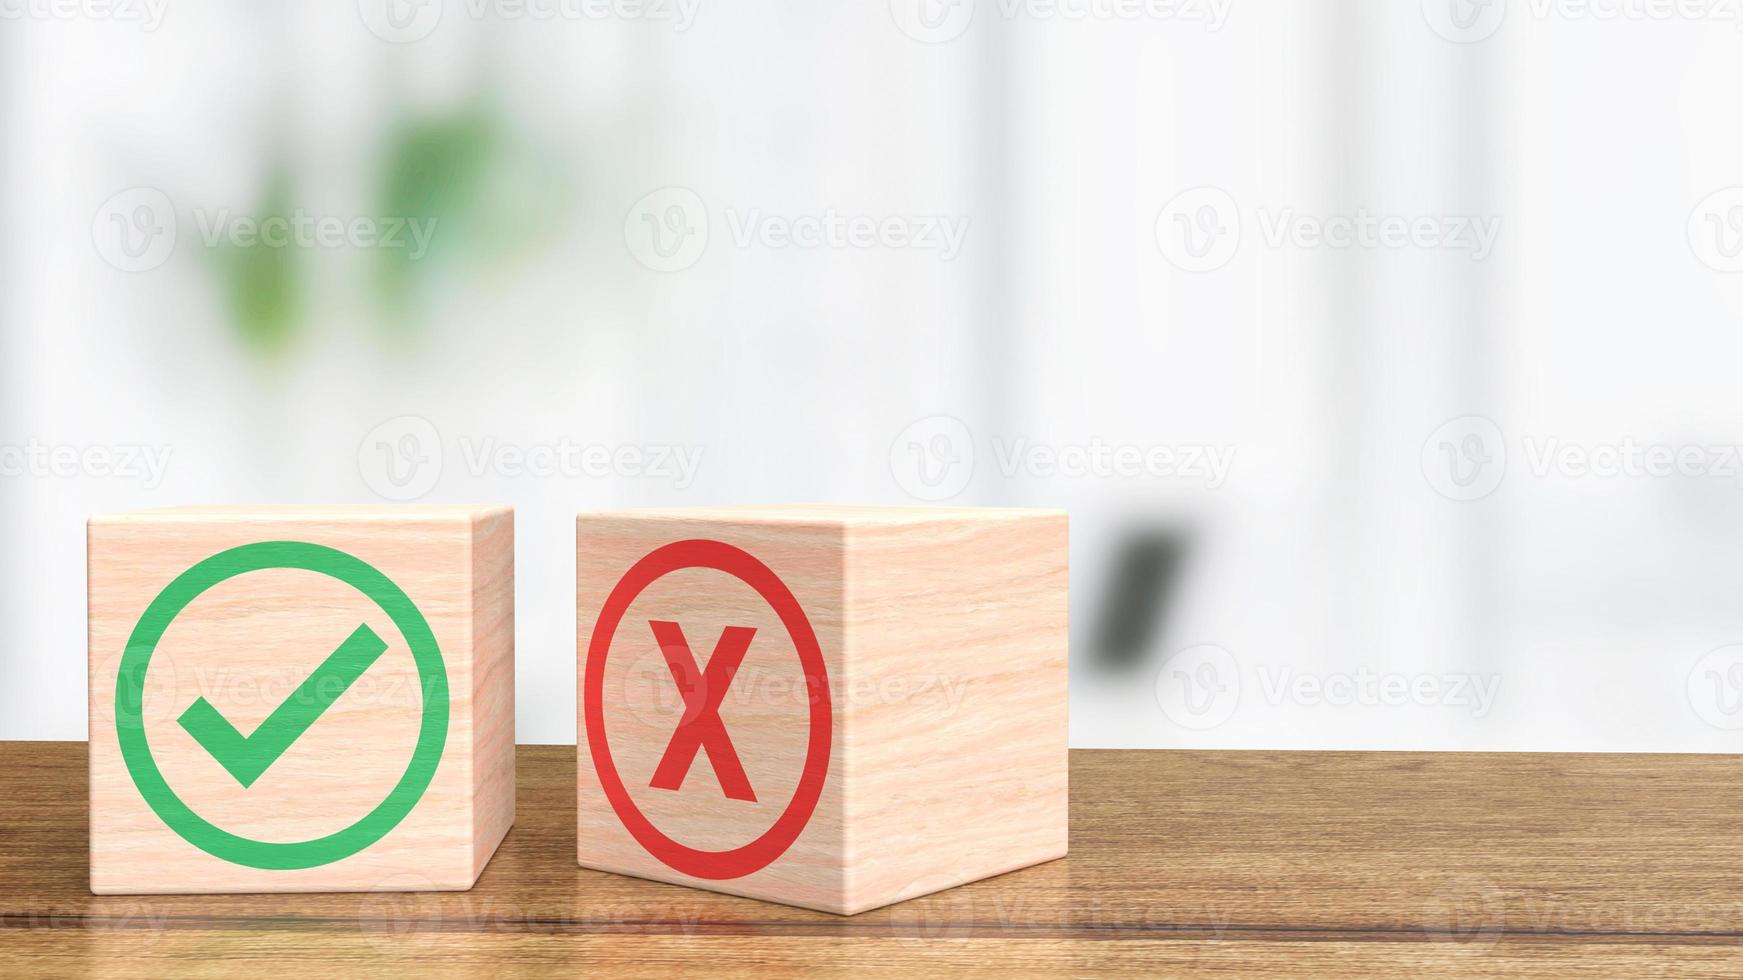 The right and wrong on blank wood cube for business concept 3d rendering photo